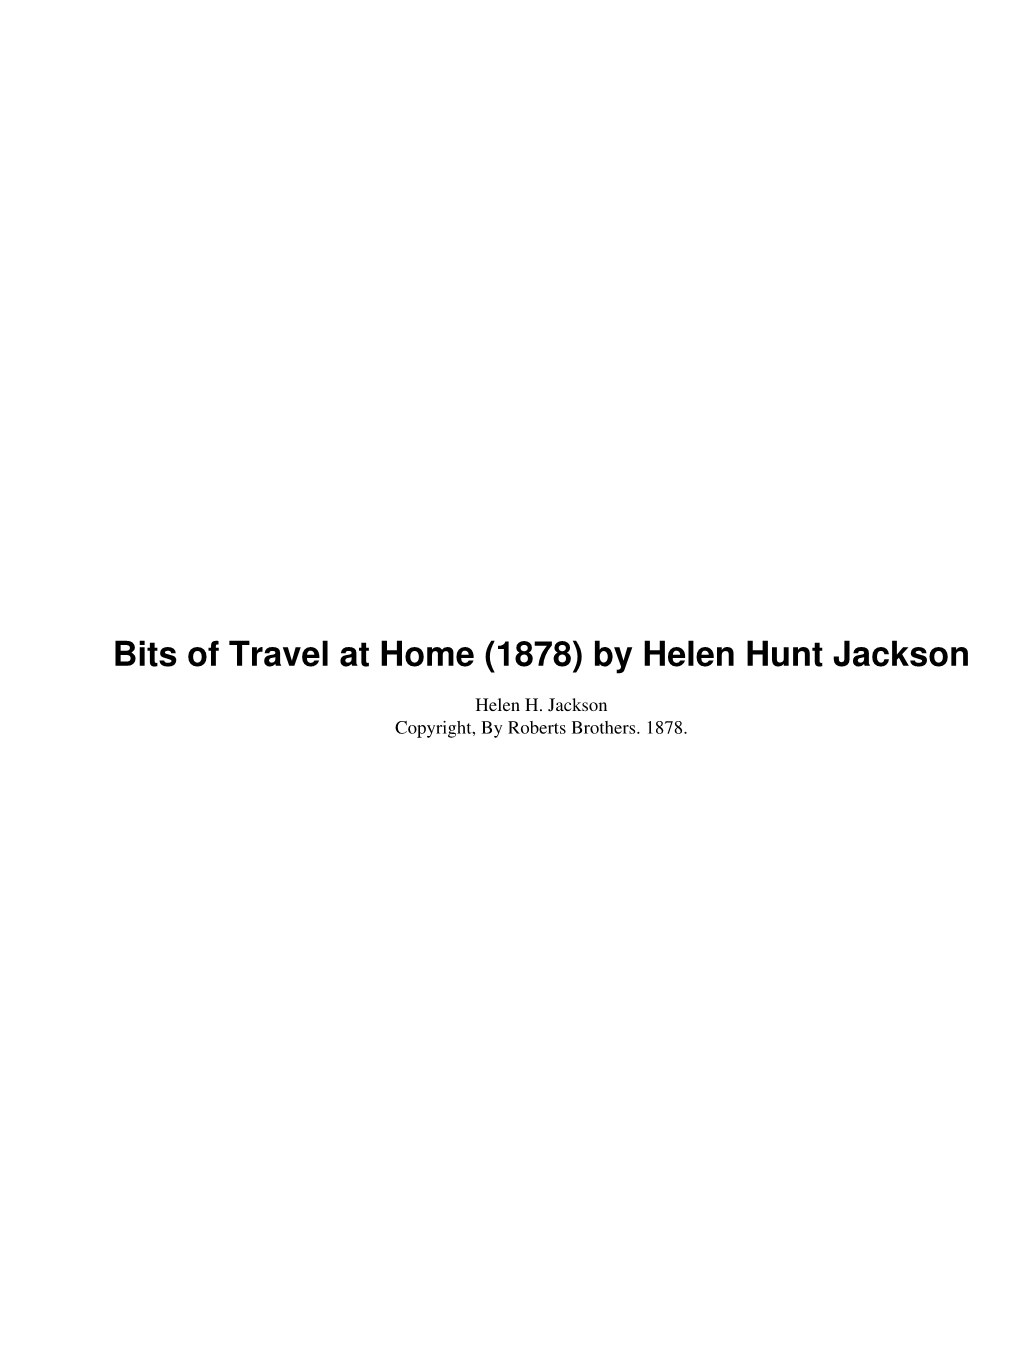 Bits of Travel at Home (1878) by Helen Hunt Jackson